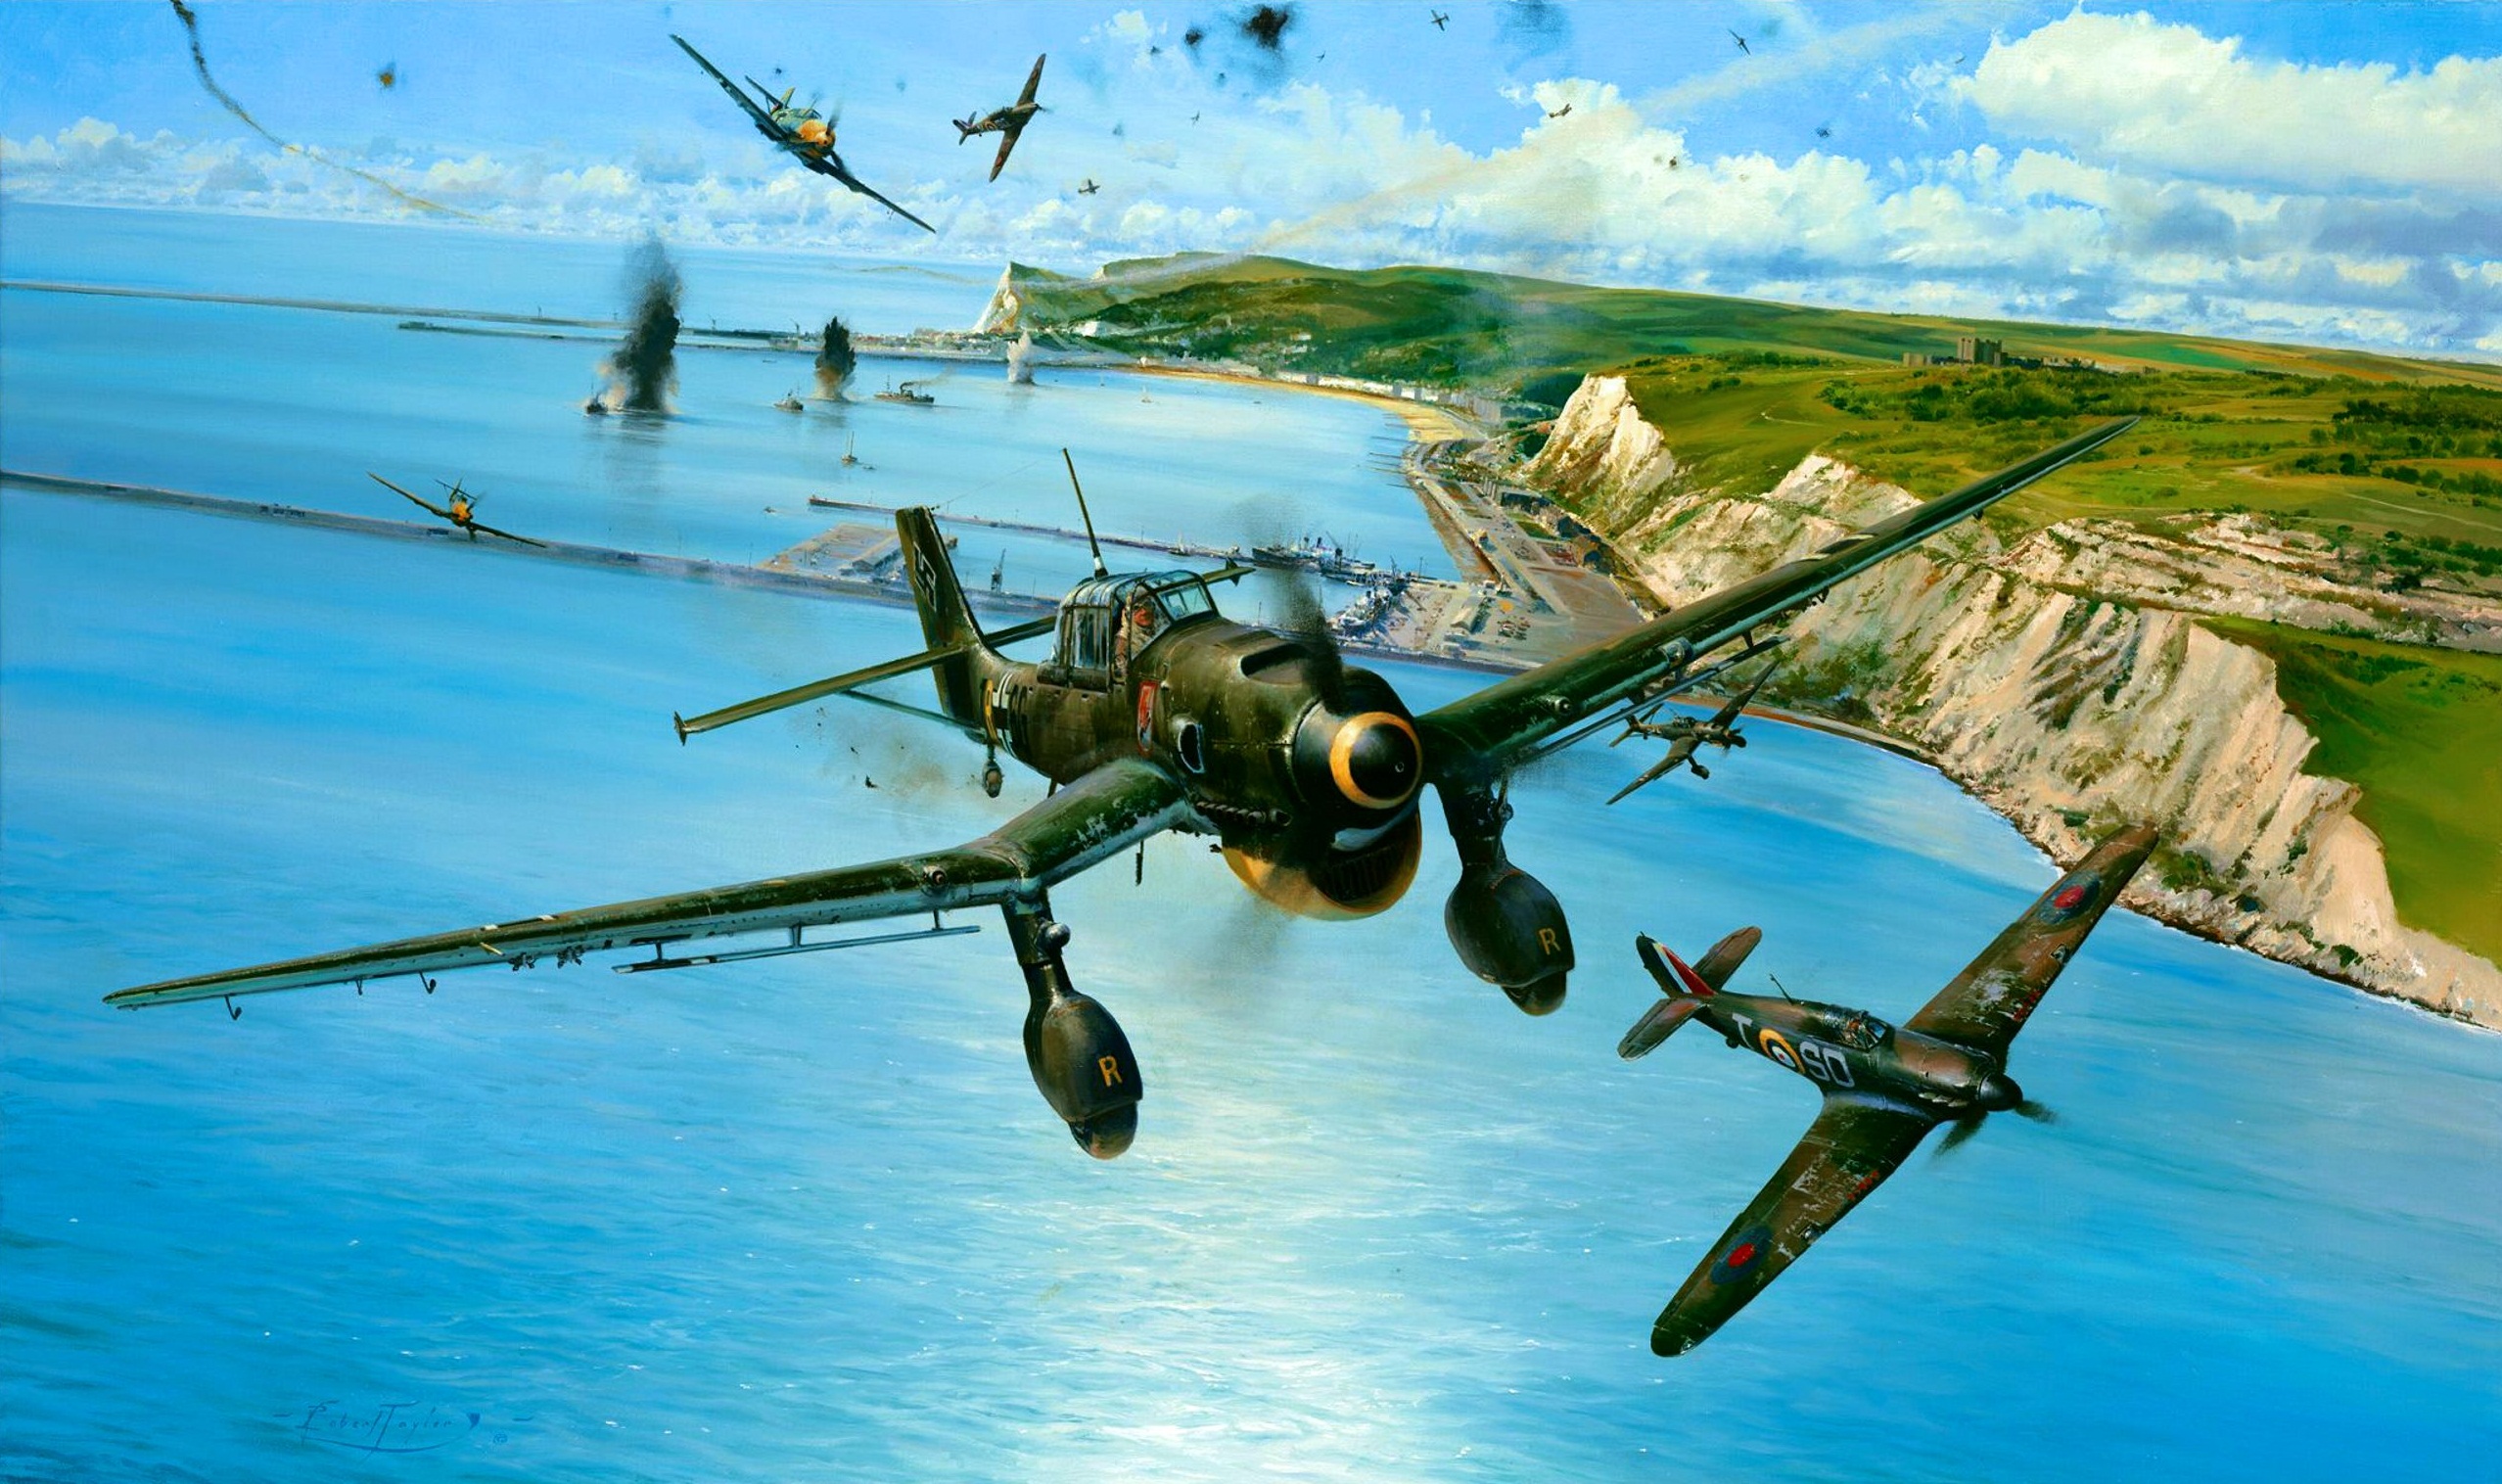 General 2556x1516 World War II military military aircraft aircraft airplane Boxart Luftwaffe Germany Junkers Bomber Cliffs of Dover Dive bomber German aircraft water flying Battle of Britain sky Junkers Ju-87 Stuka signature